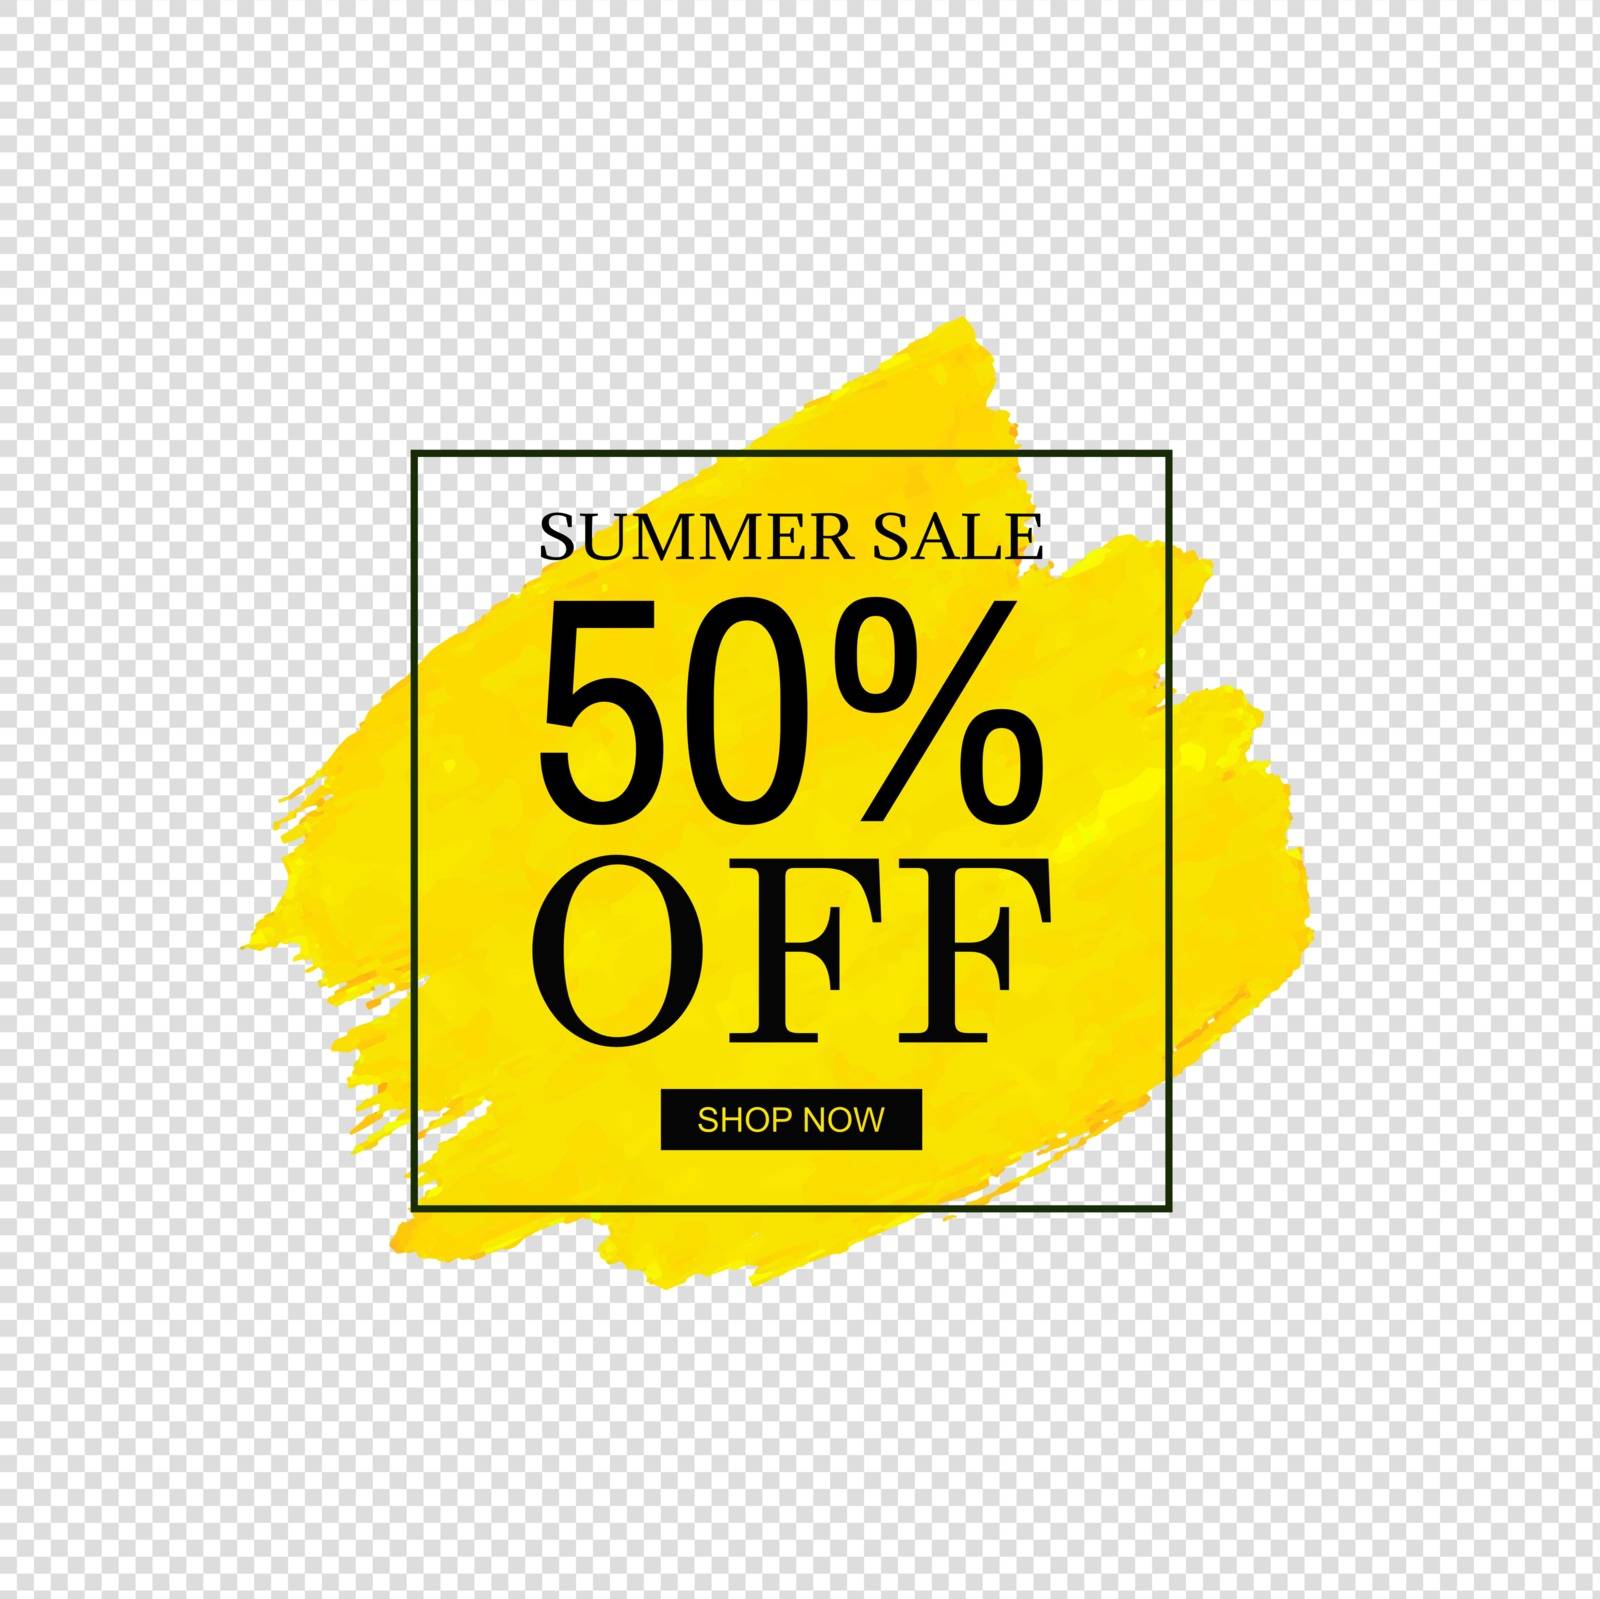 Sale Banner Yellow Blob Isolated Transparent Background, Vector Illustration